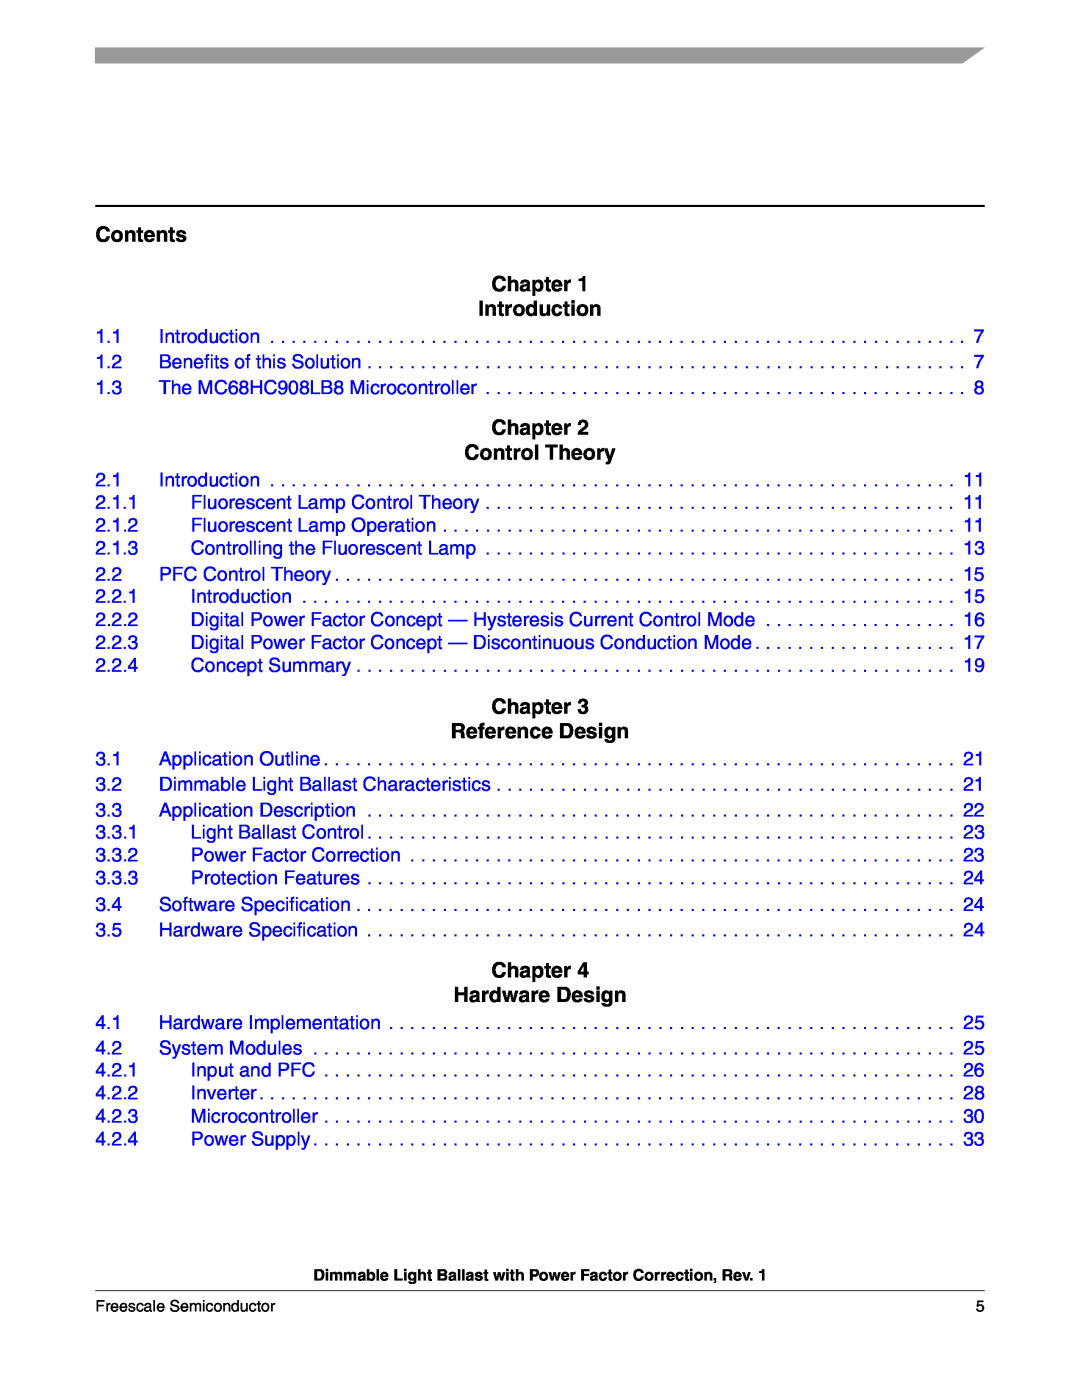 Freescale Semiconductor M68HC08 manual Contents Chapter Introduction, Chapter Control Theory, Chapter Reference Design 